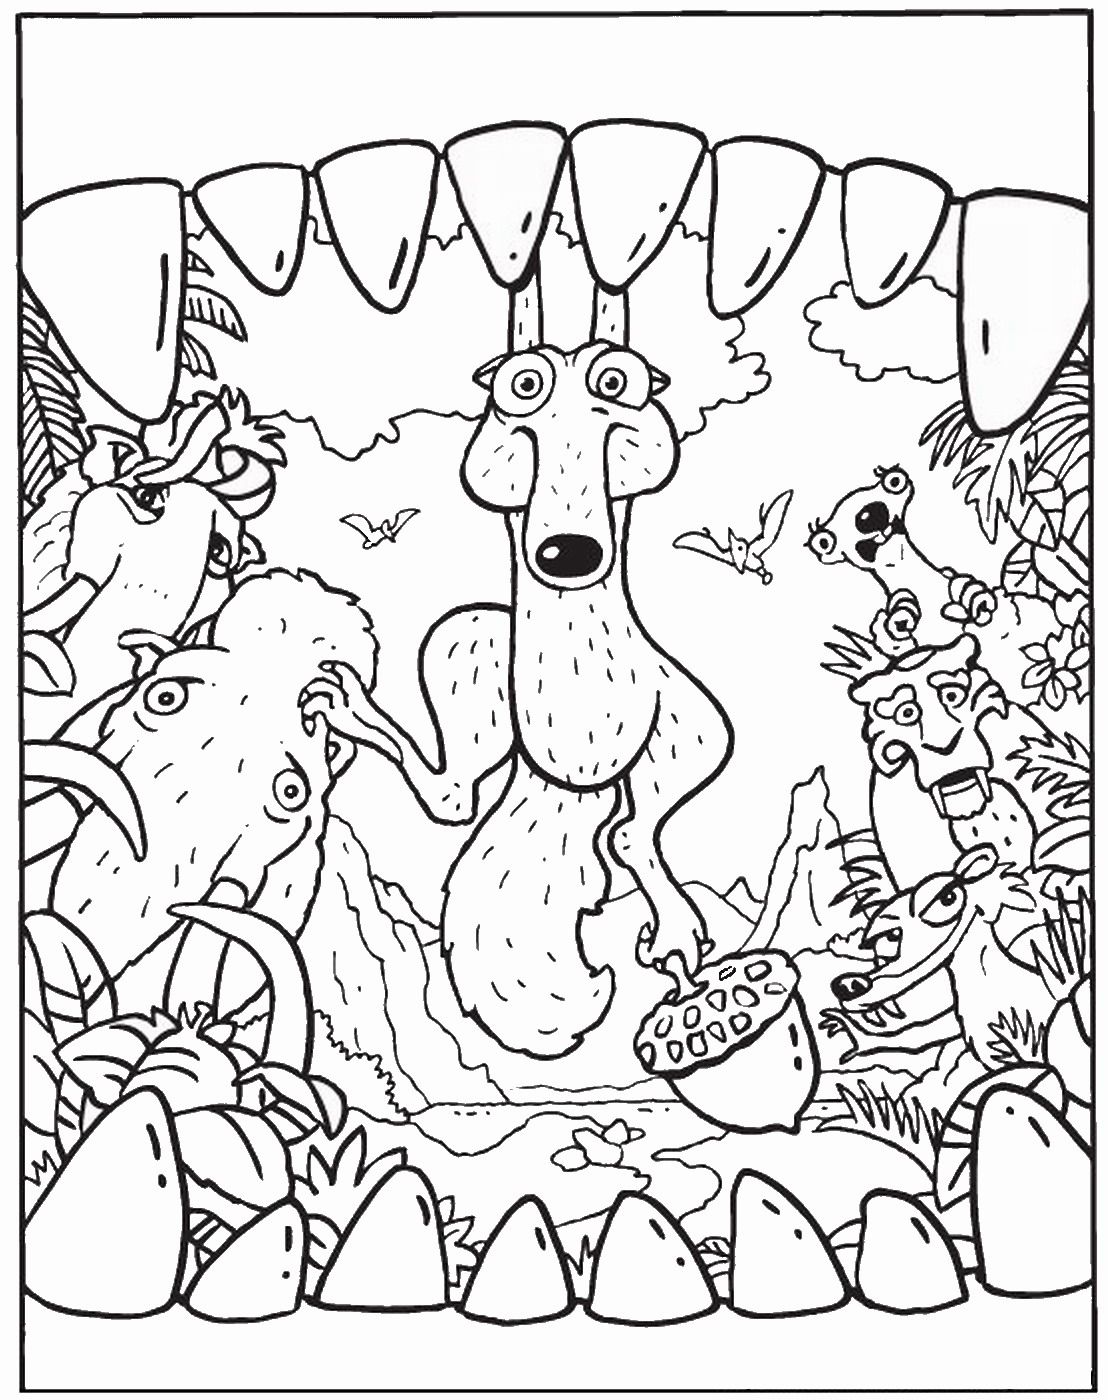 Ice age coloring pages coloring pages coloring books funny adult coloring books